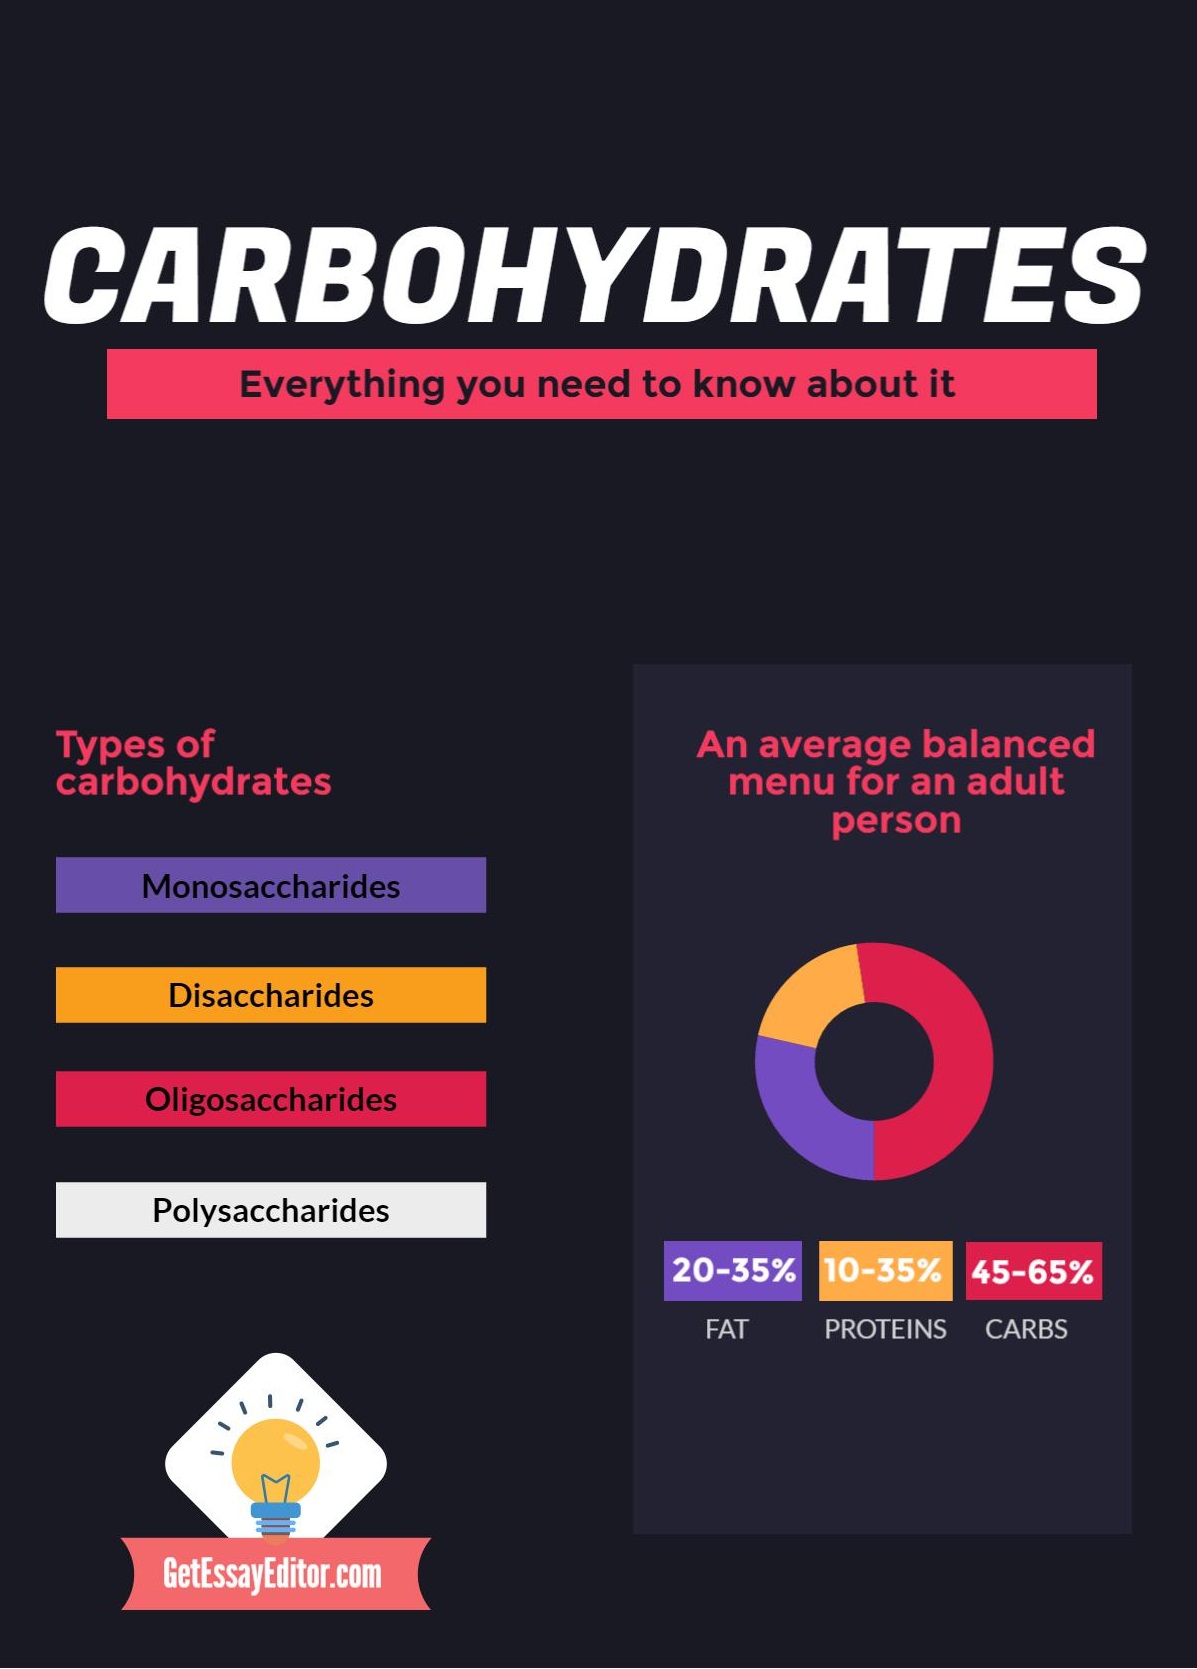 List of carbohydrates